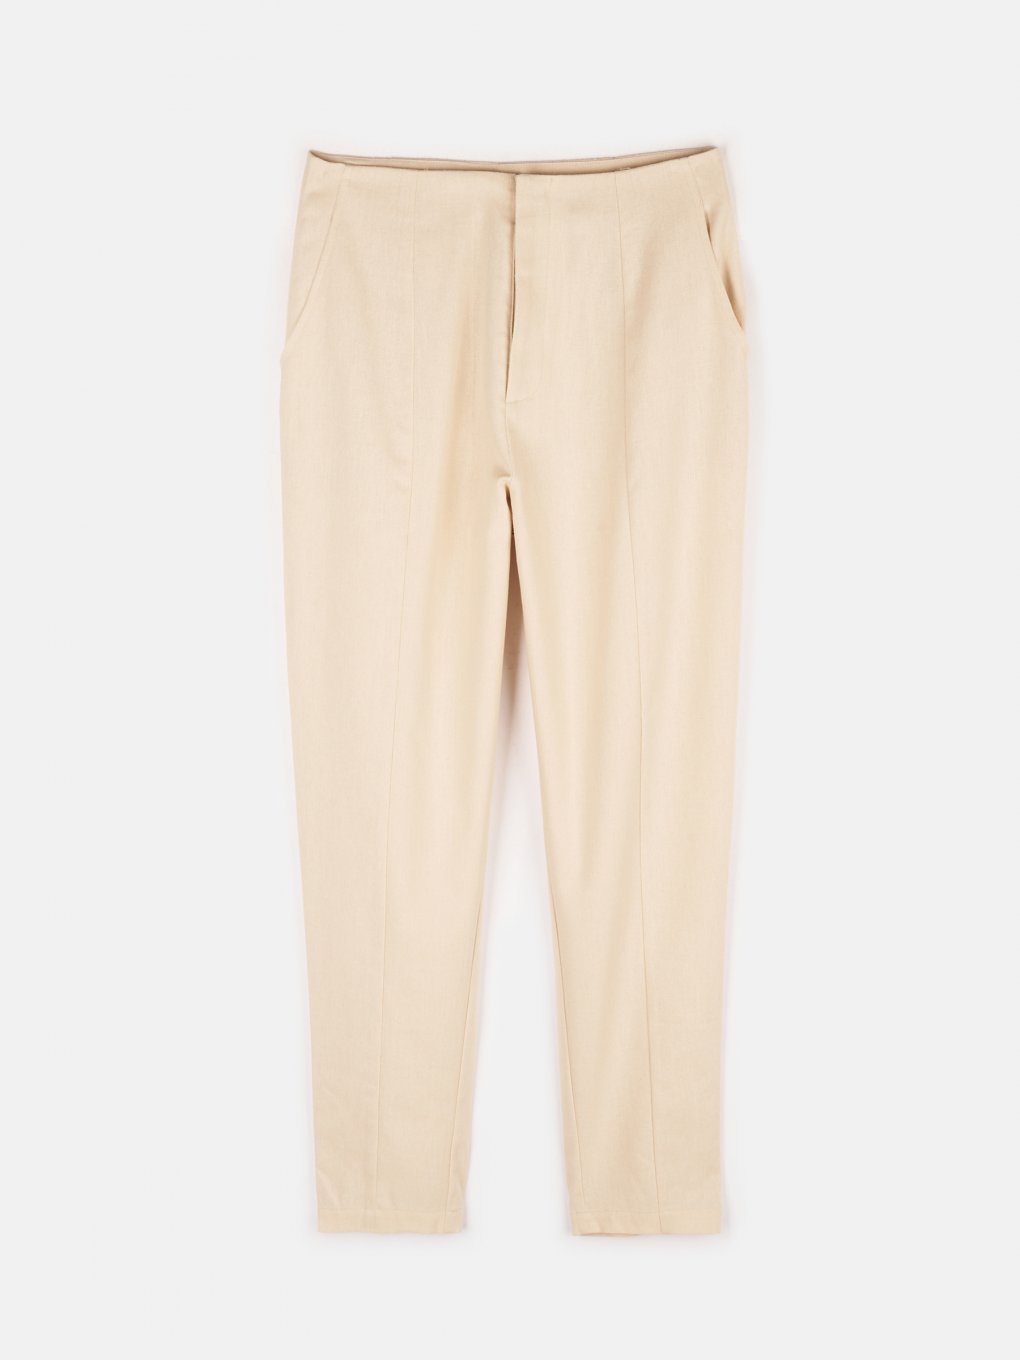 Linen blend pants with pockets